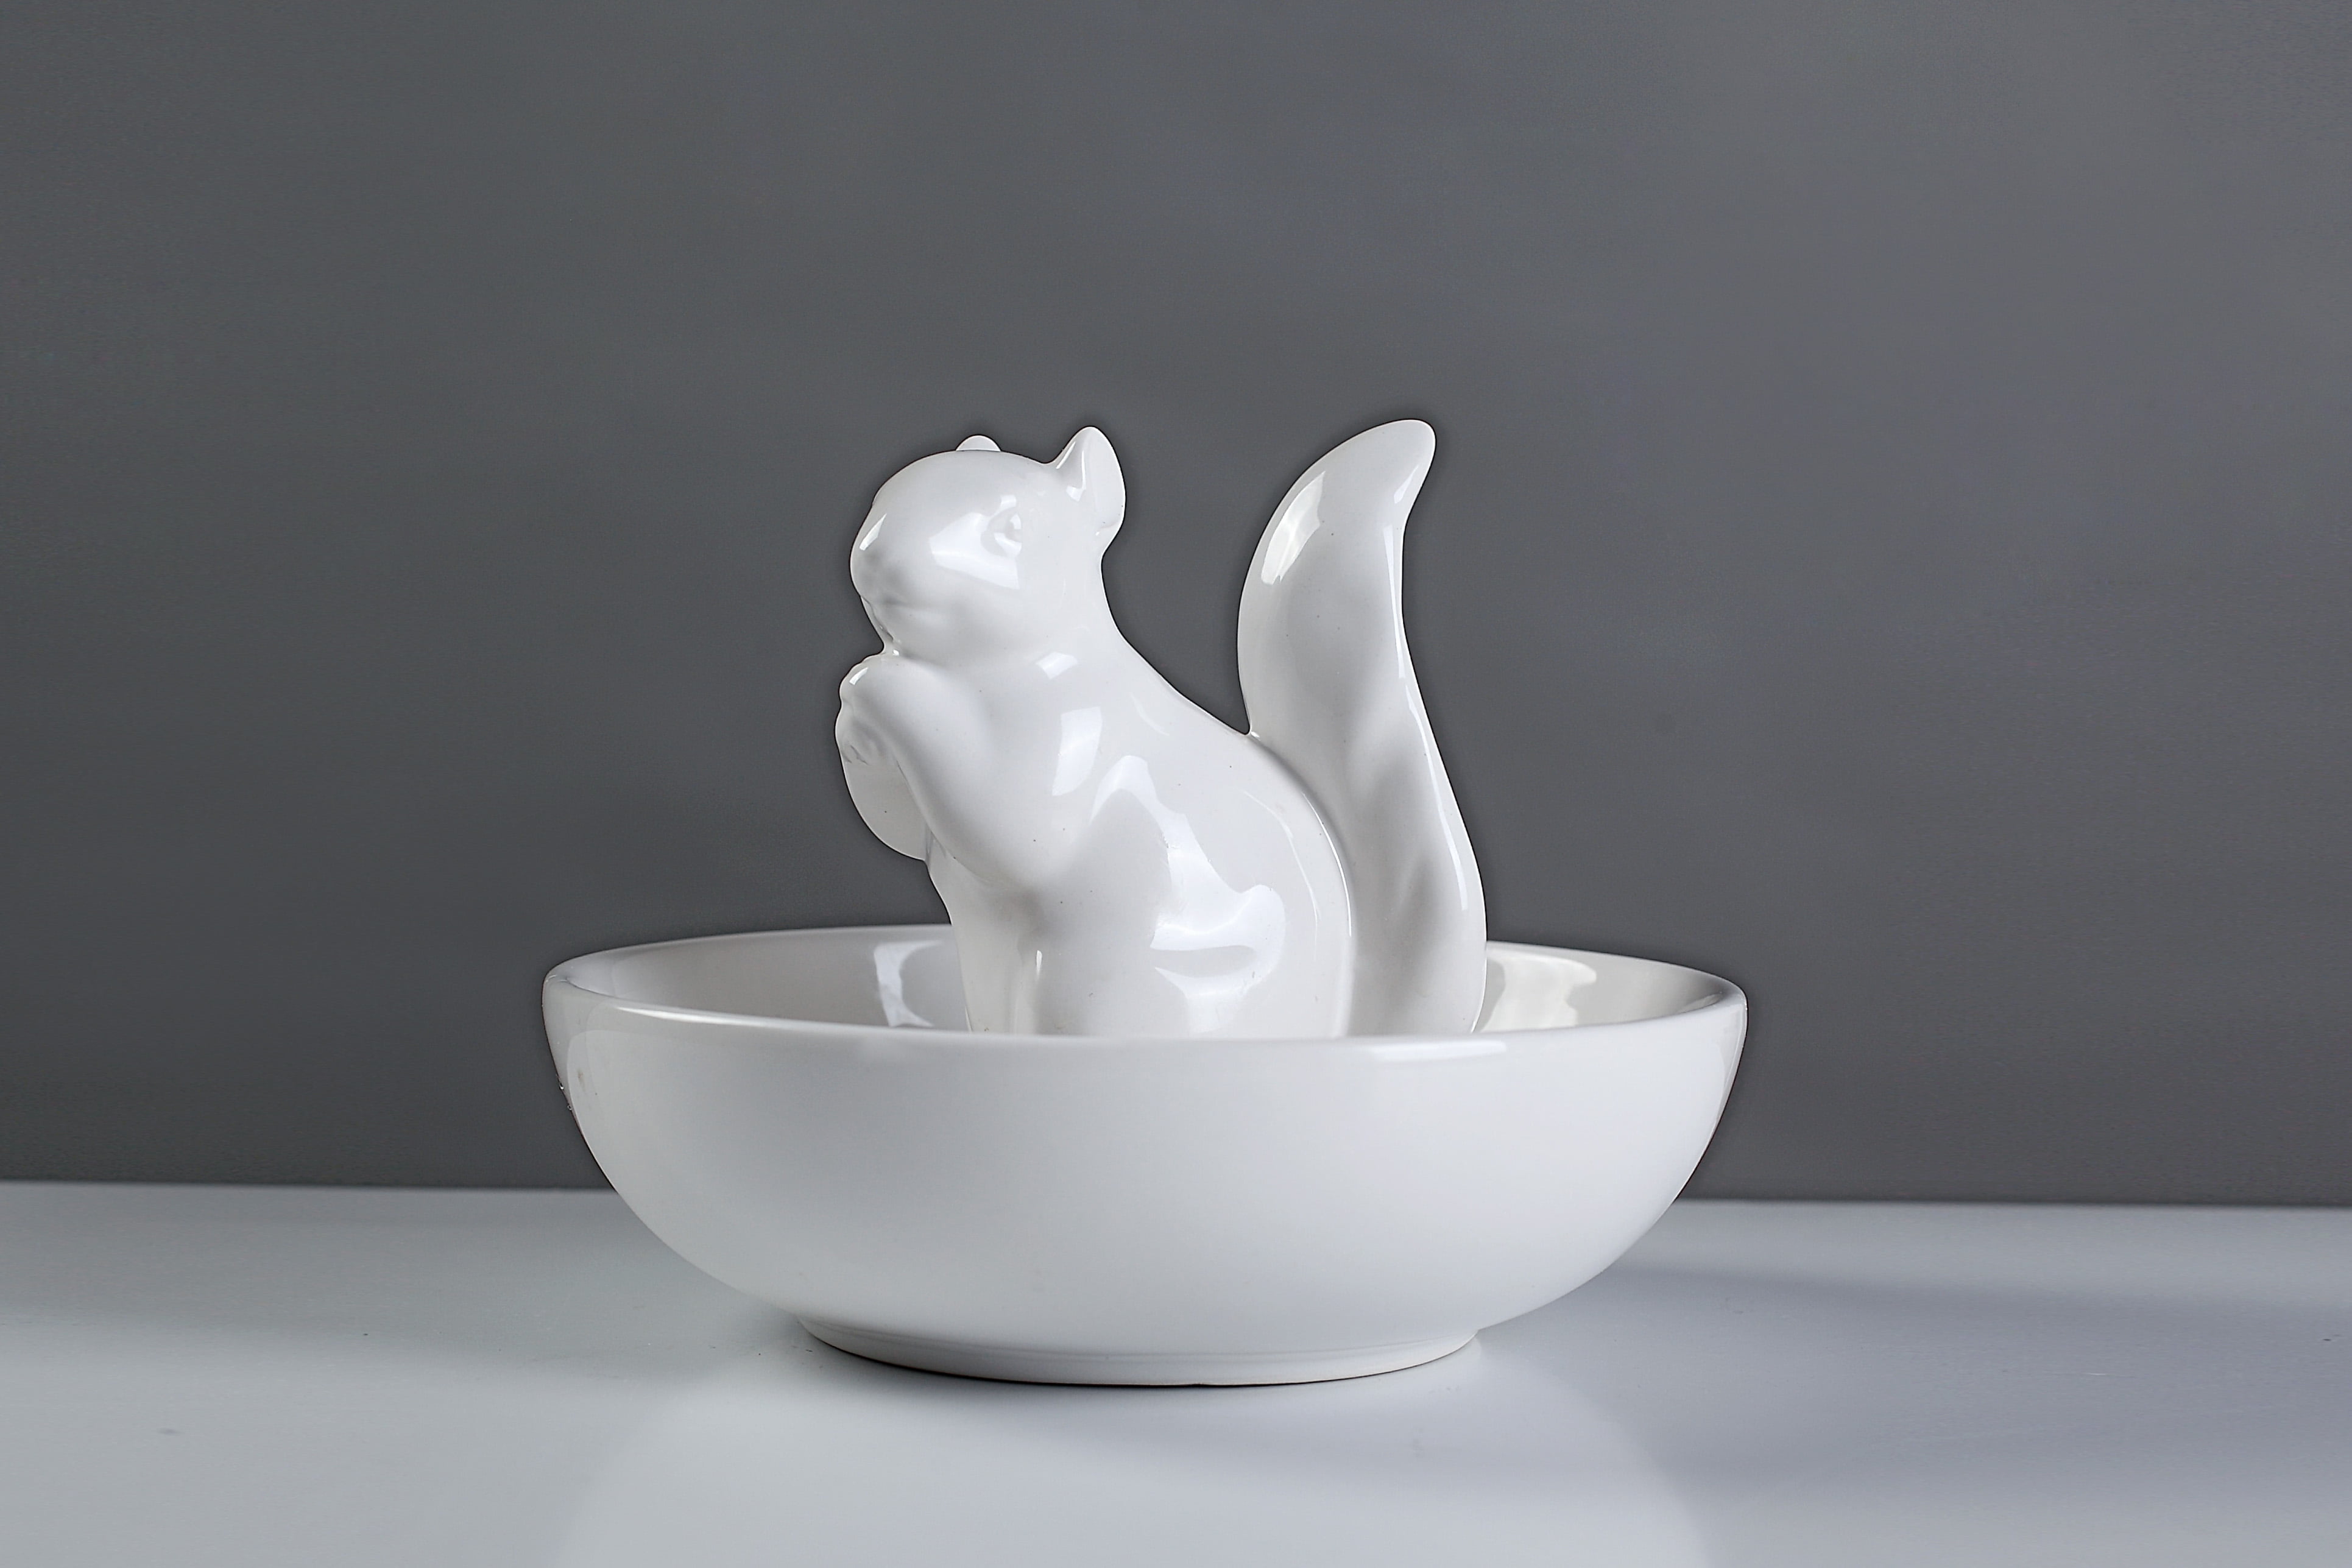 Ceramic Squirrel Stand Candy Dish... LA JOLIE MUSE Nut Bowl Snack Serving Dish